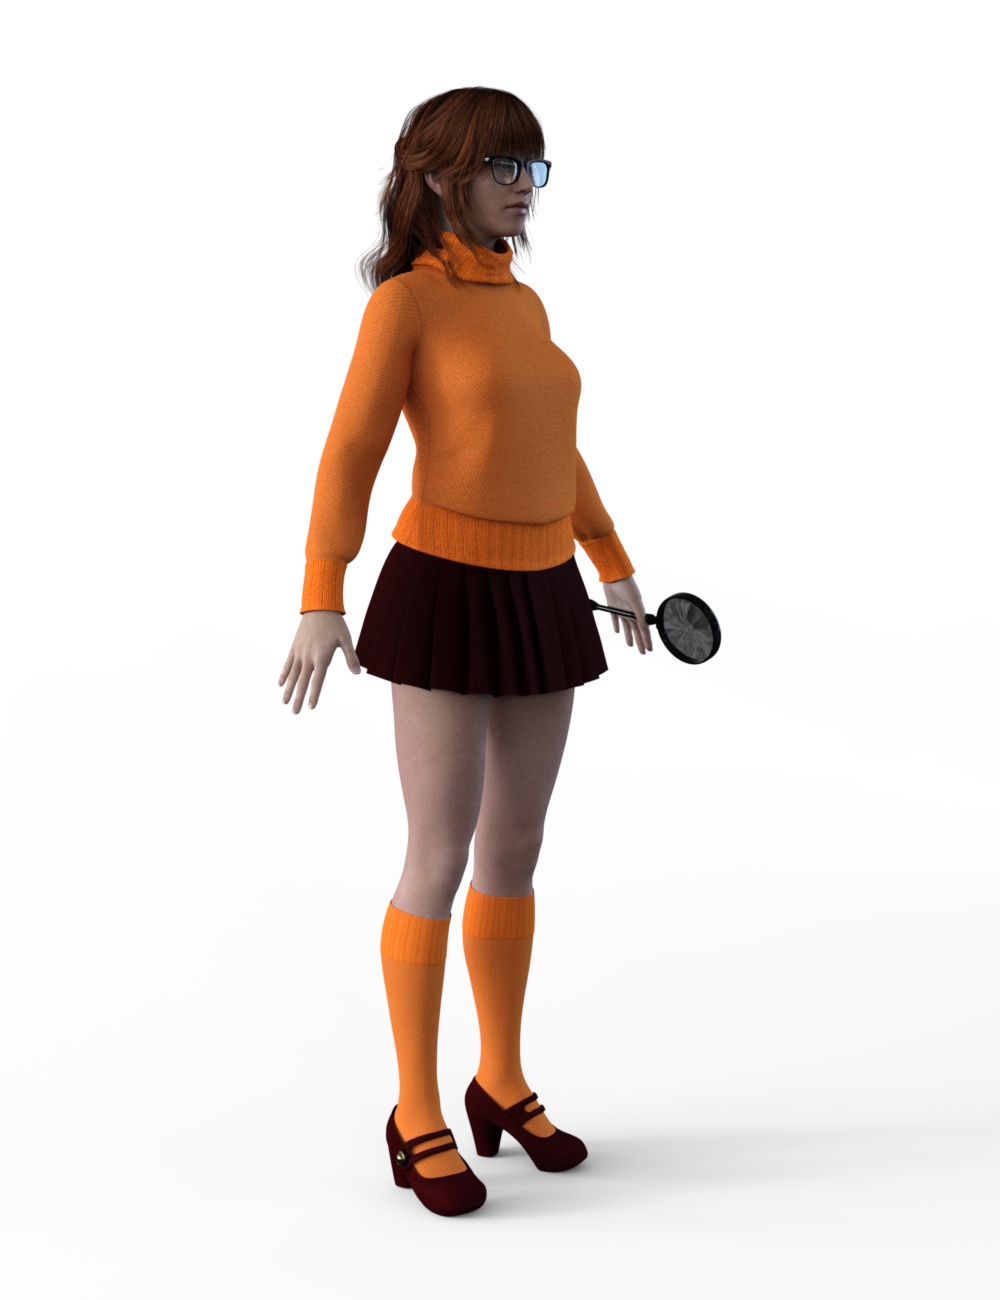 FBX- Base Female Mystery Solver Outfit by: Paleo, 3D Models by Daz 3D